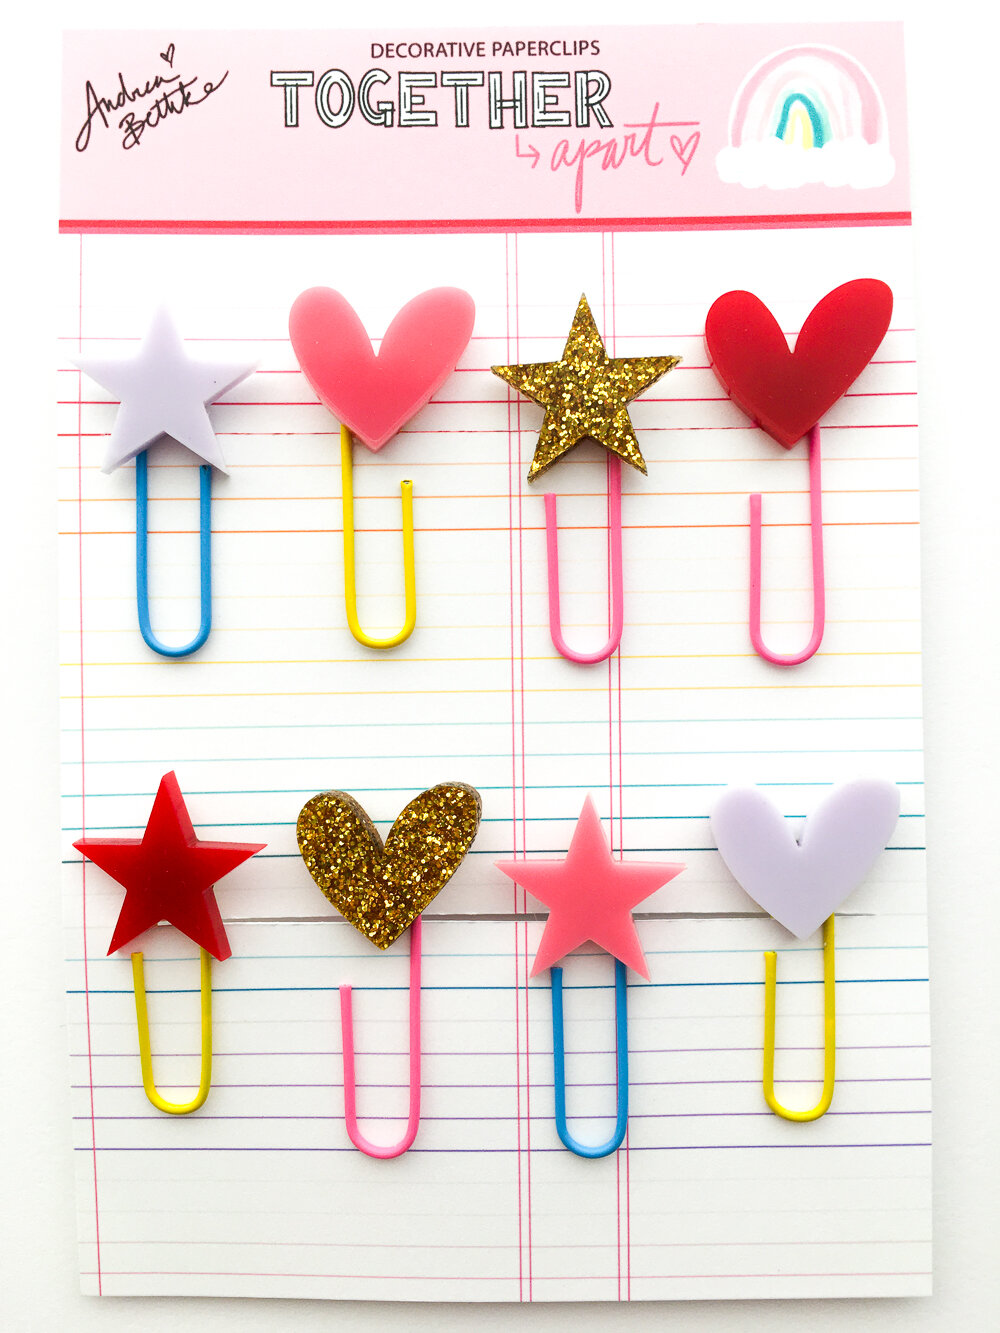 Together-Apart - Decorative Paperclips.jpg